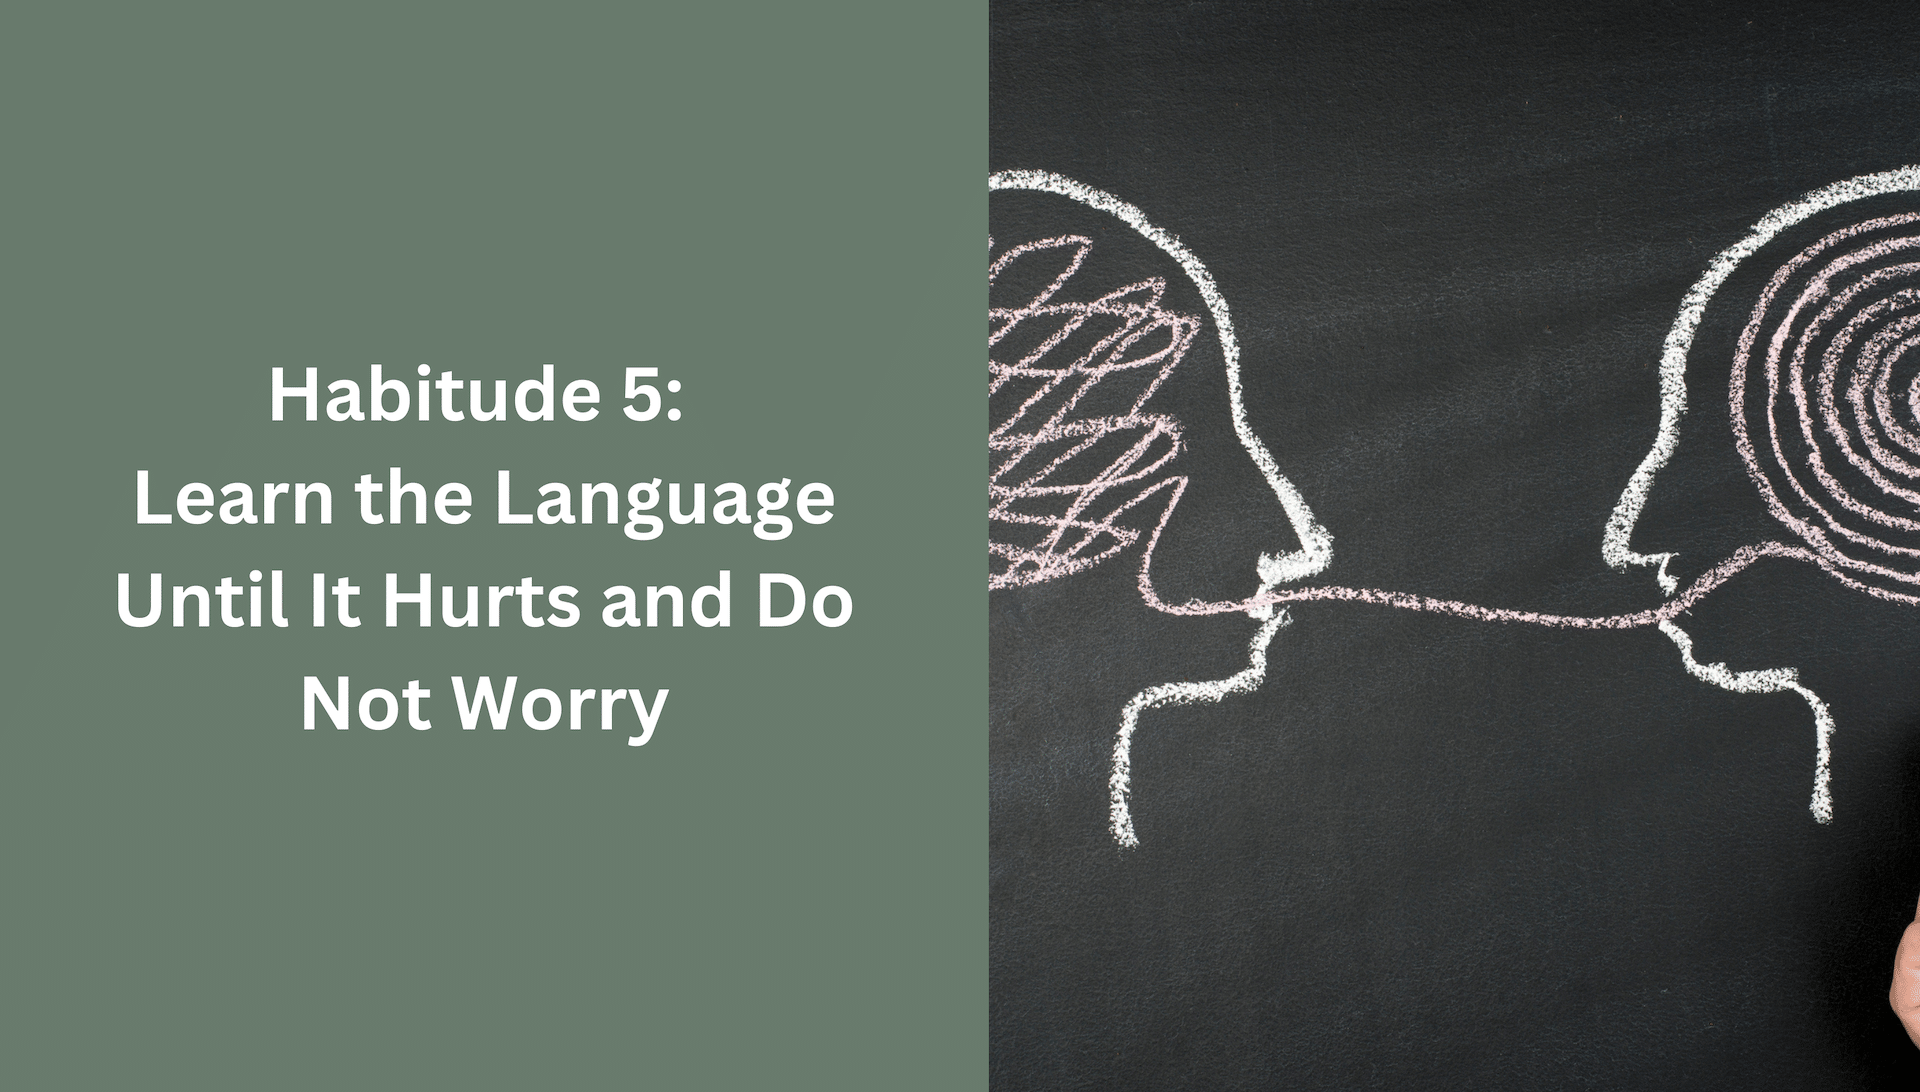 Habitude 5: Learn the language until it hurts and do not worry